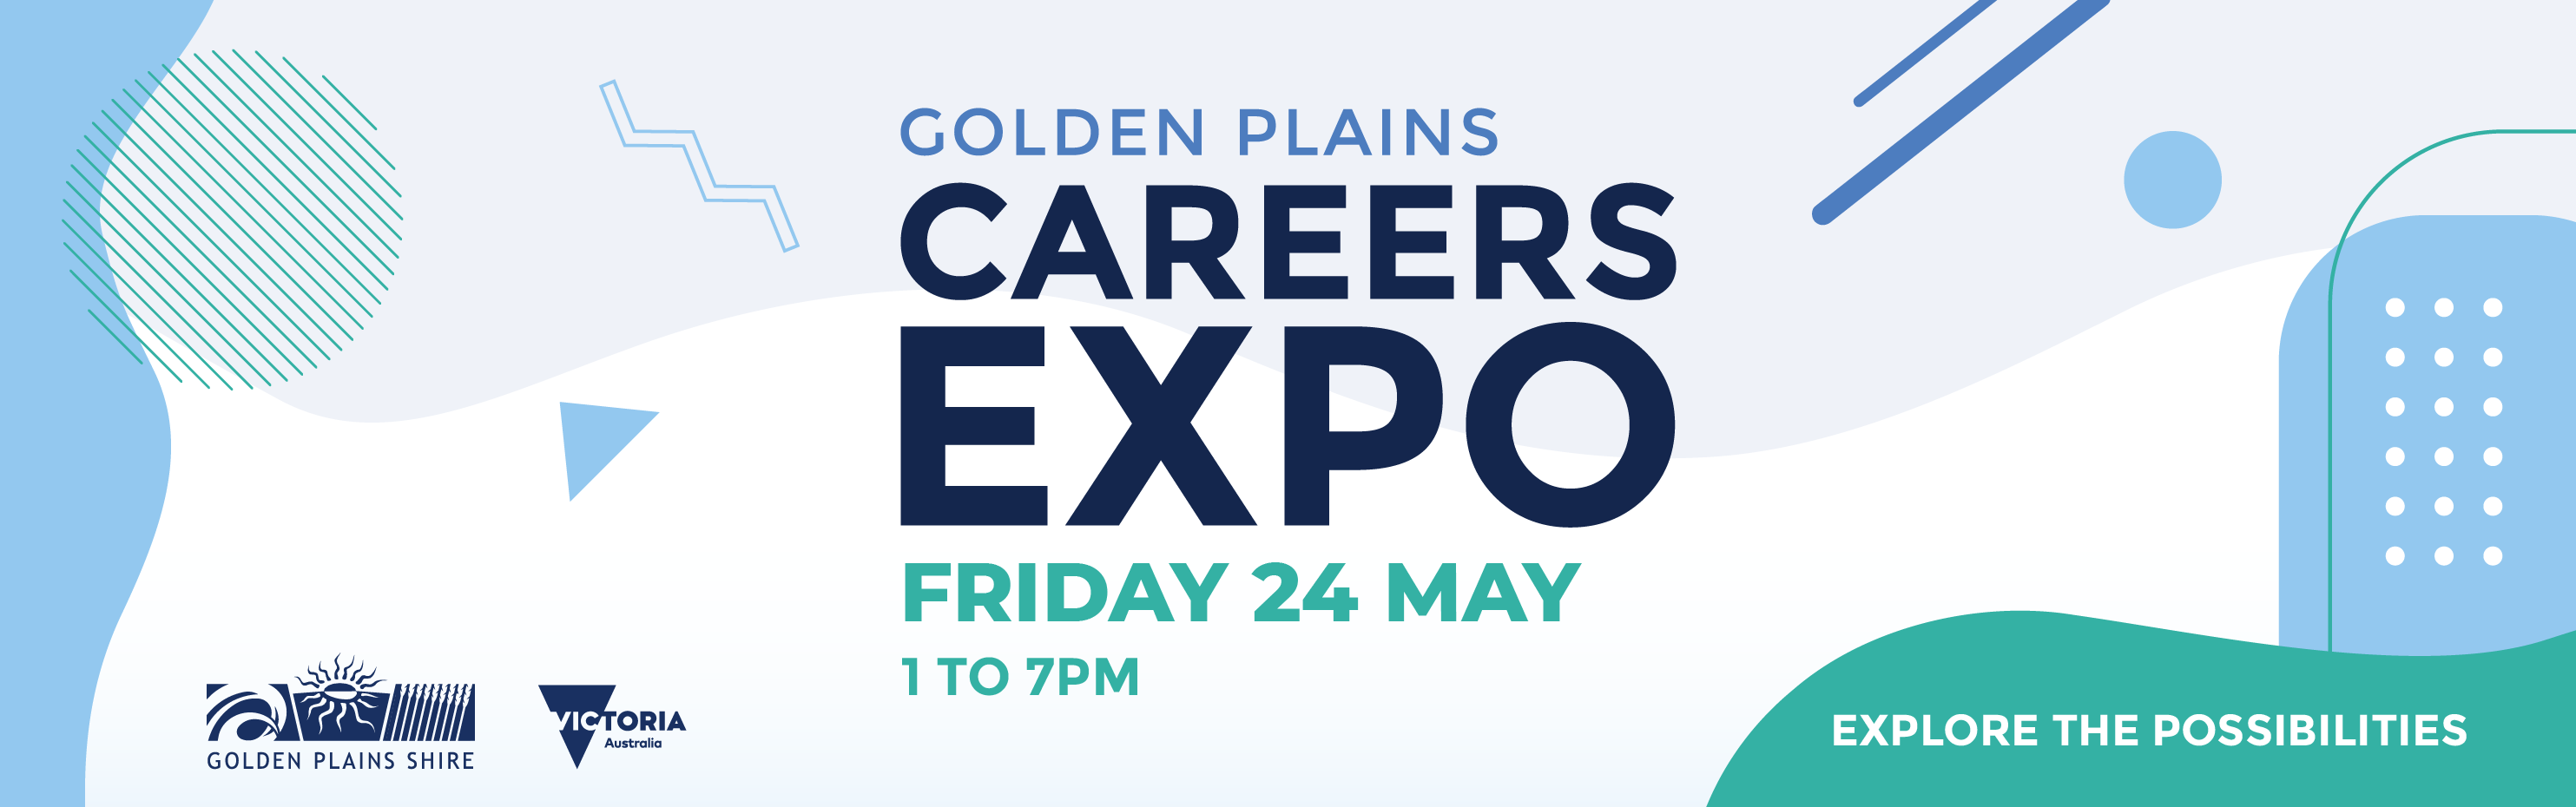 Careers Expo banner